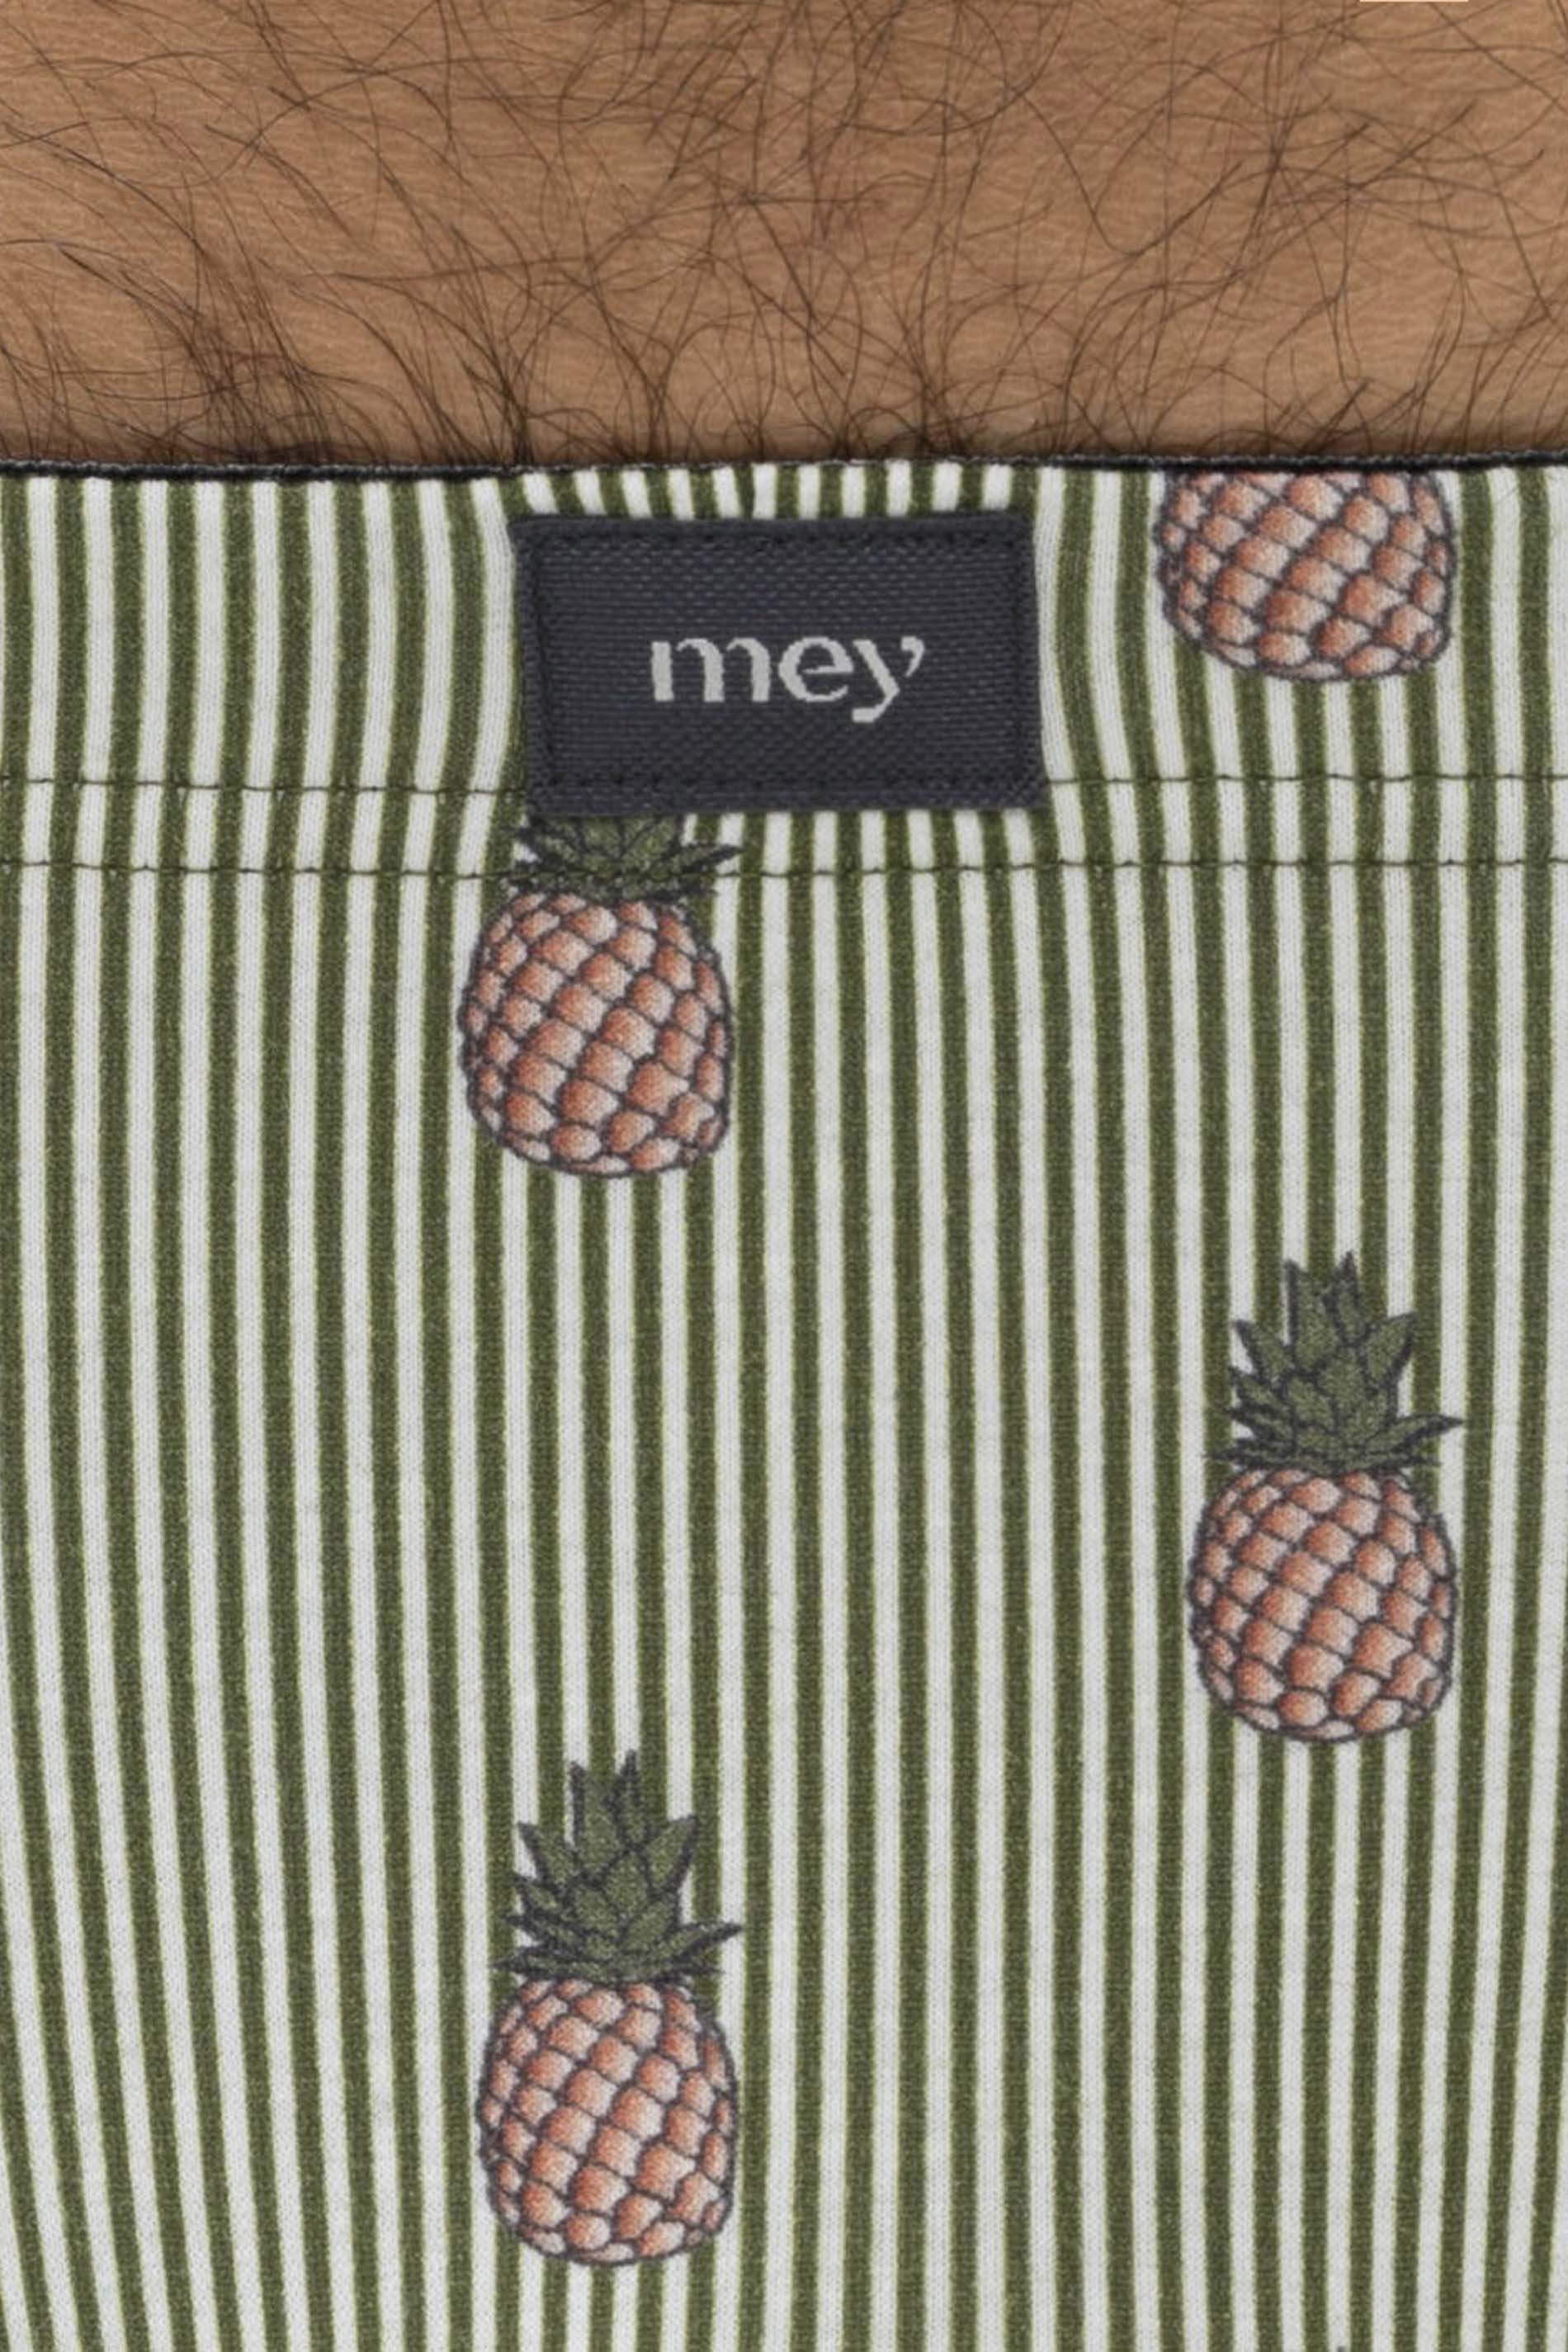 Shorty Serie Pineapple Detail View 01 | mey®